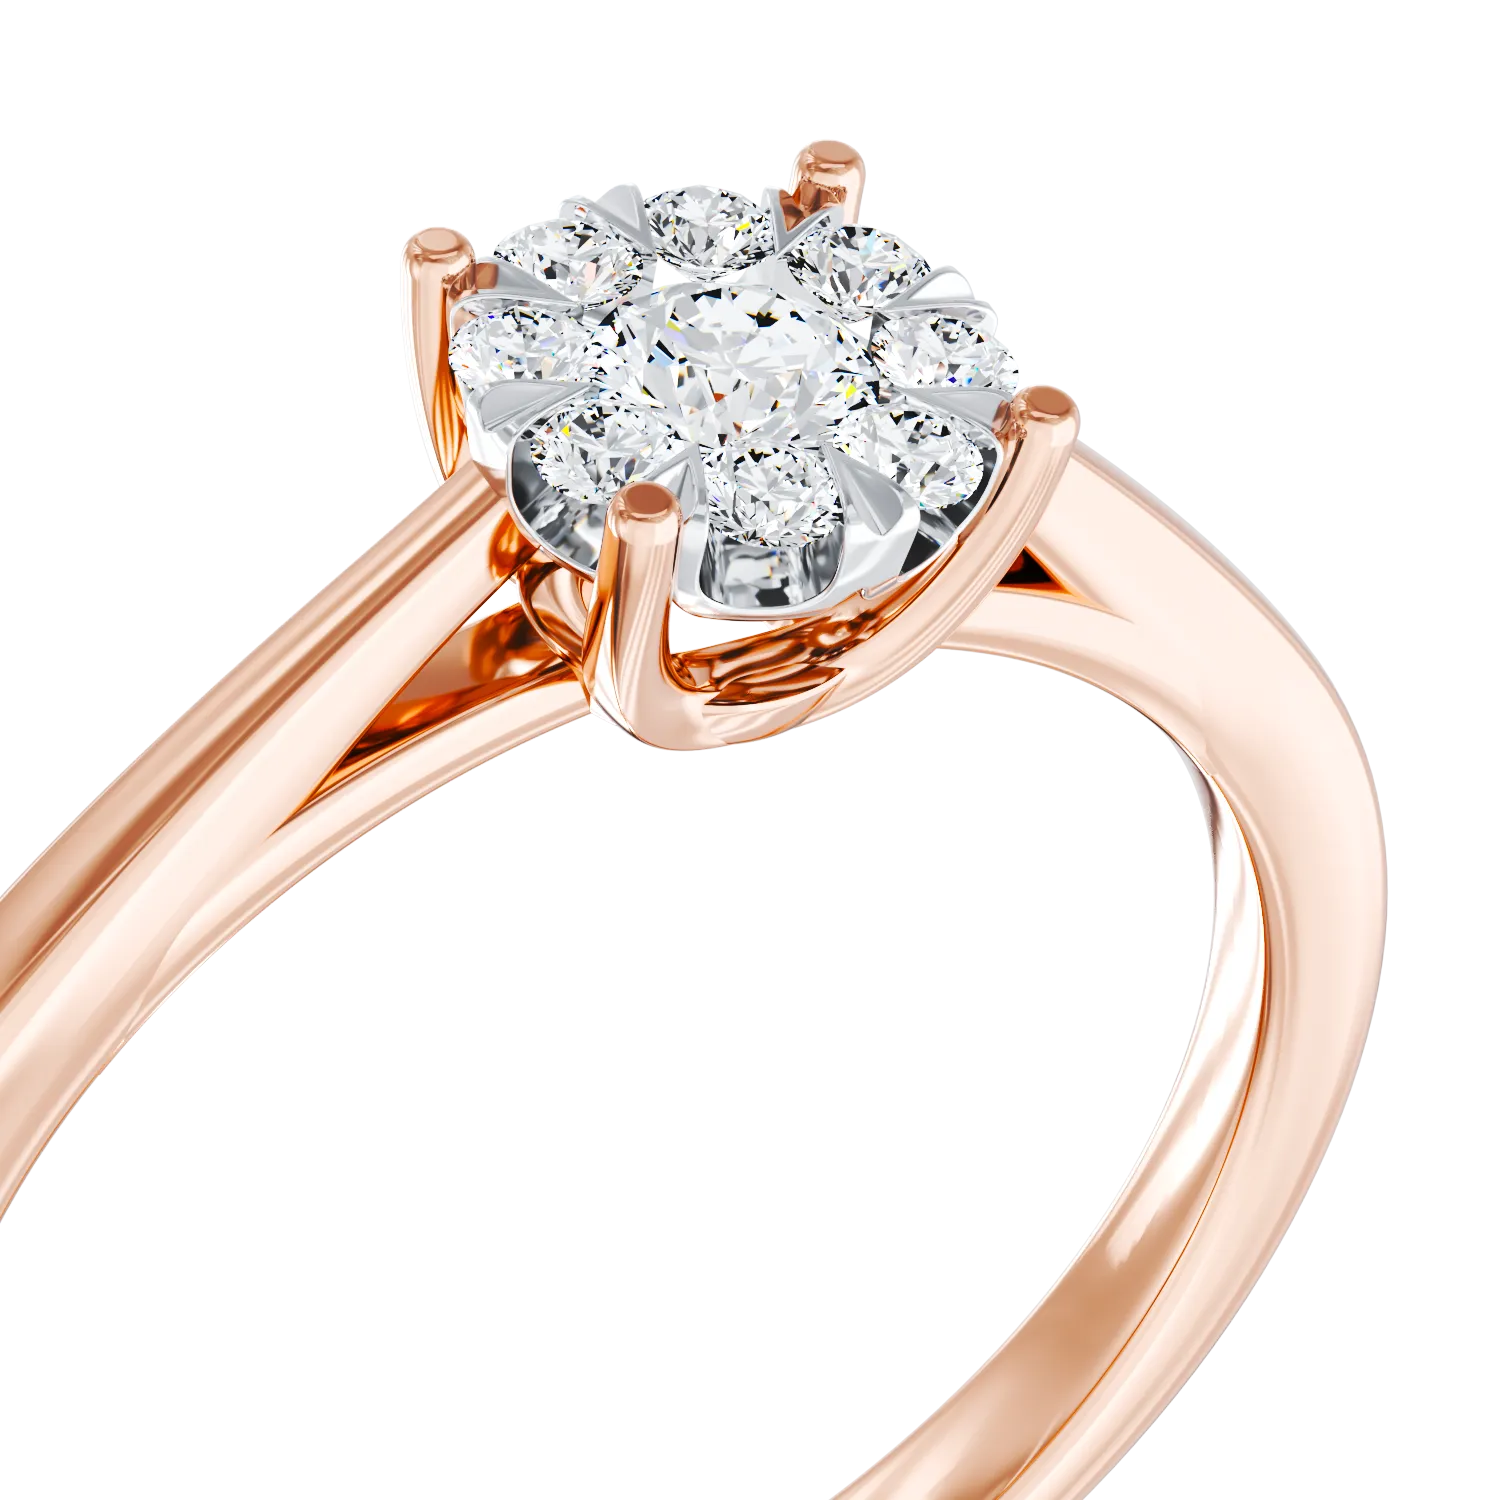 18K rose gold engagement ring with 0.15ct diamonds